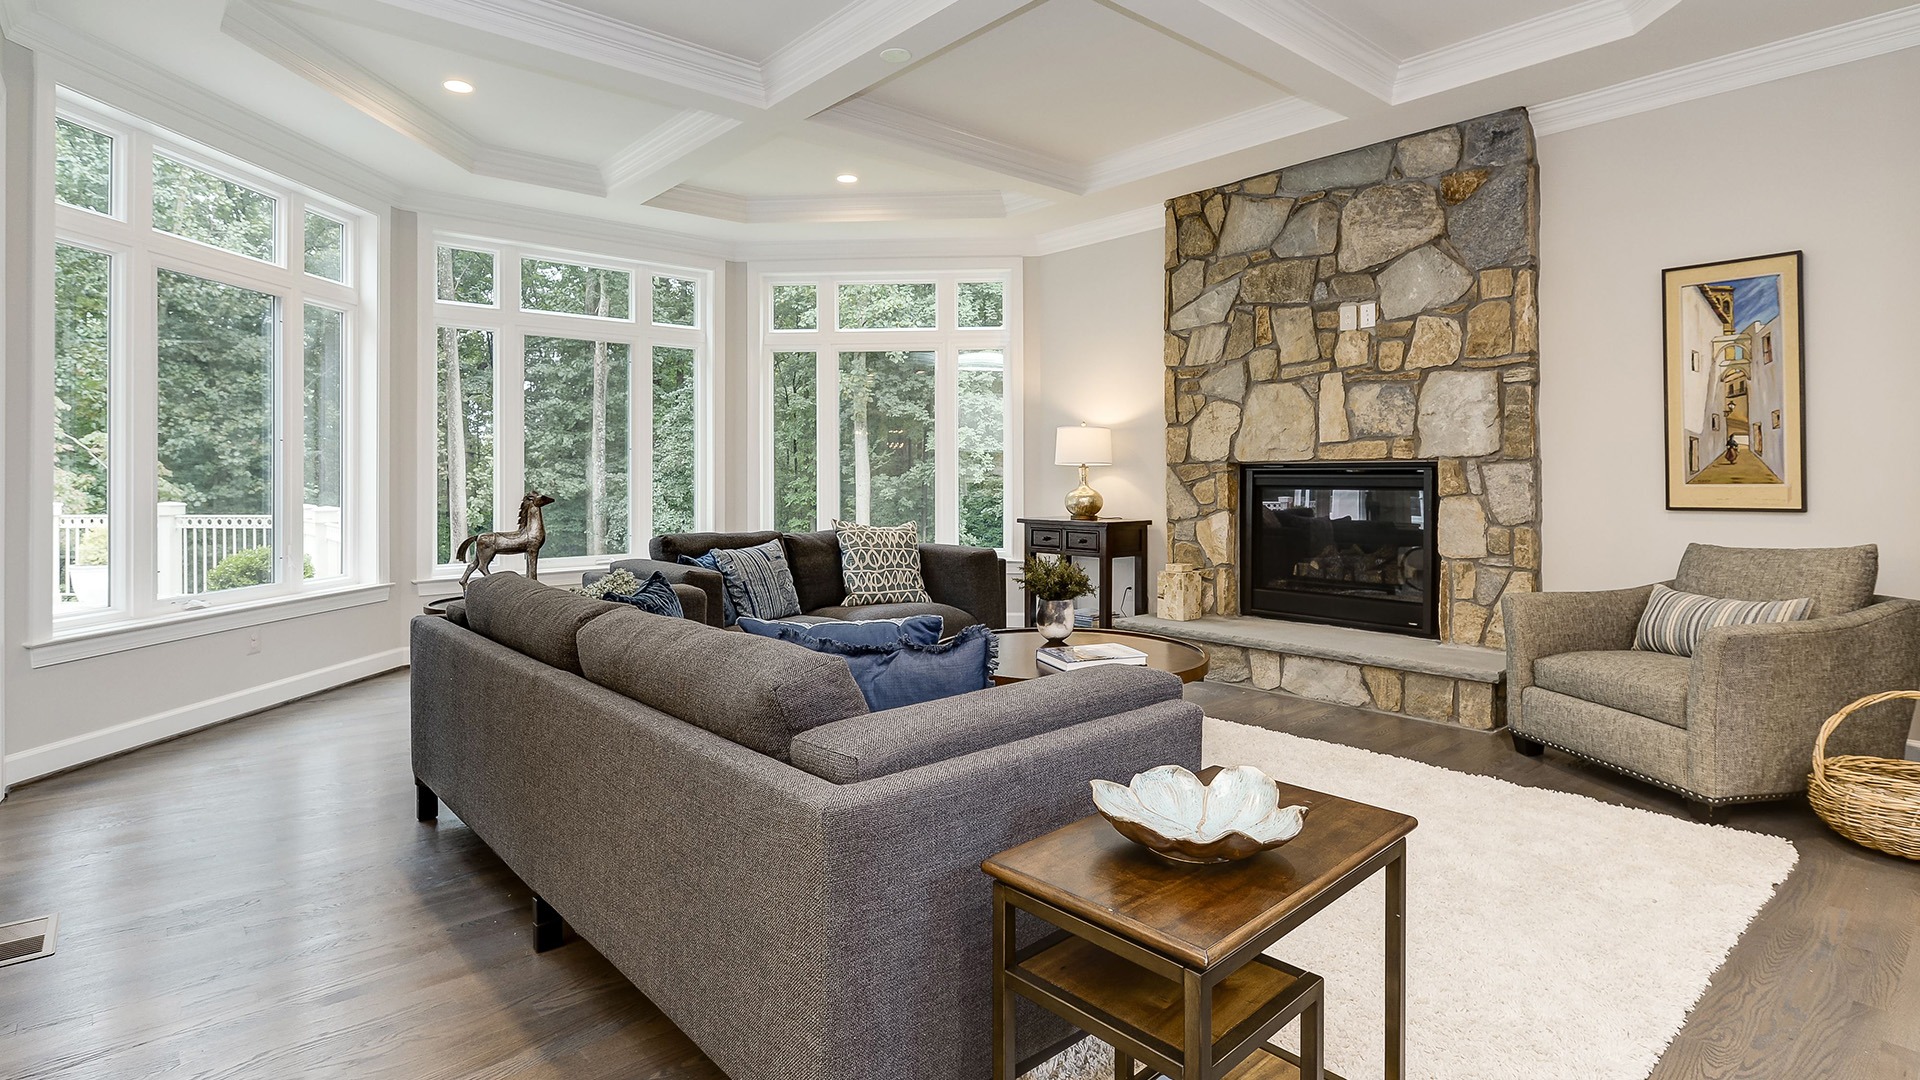 Winthrop Family Room. Some optional features shown.